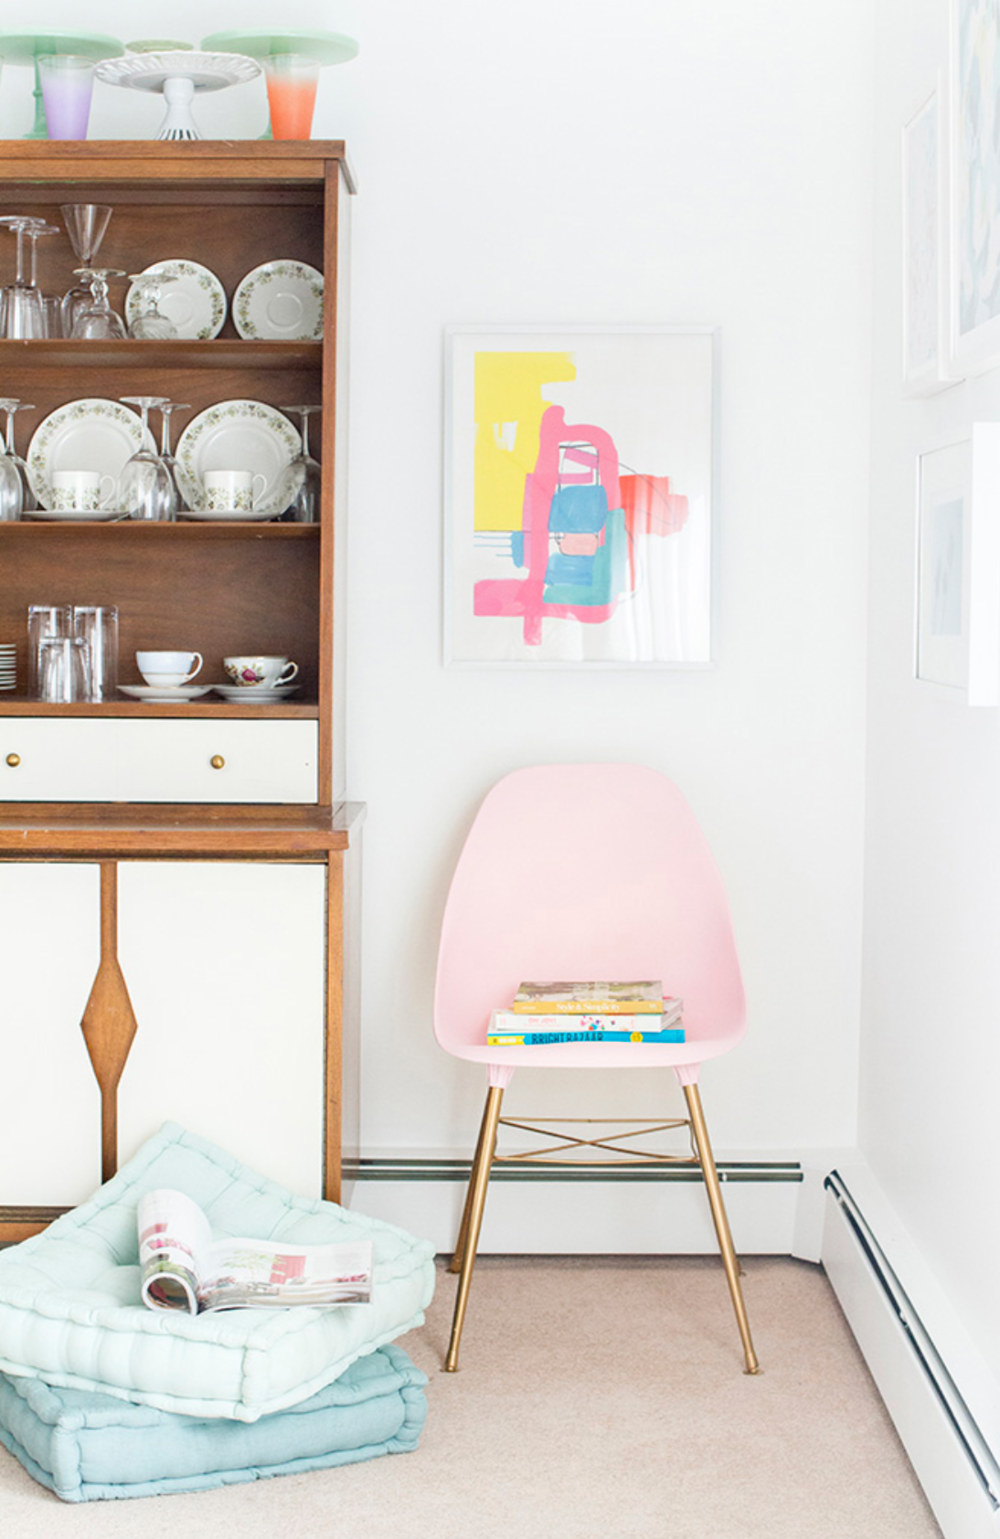 A minimalistic use of colors in a simple room.